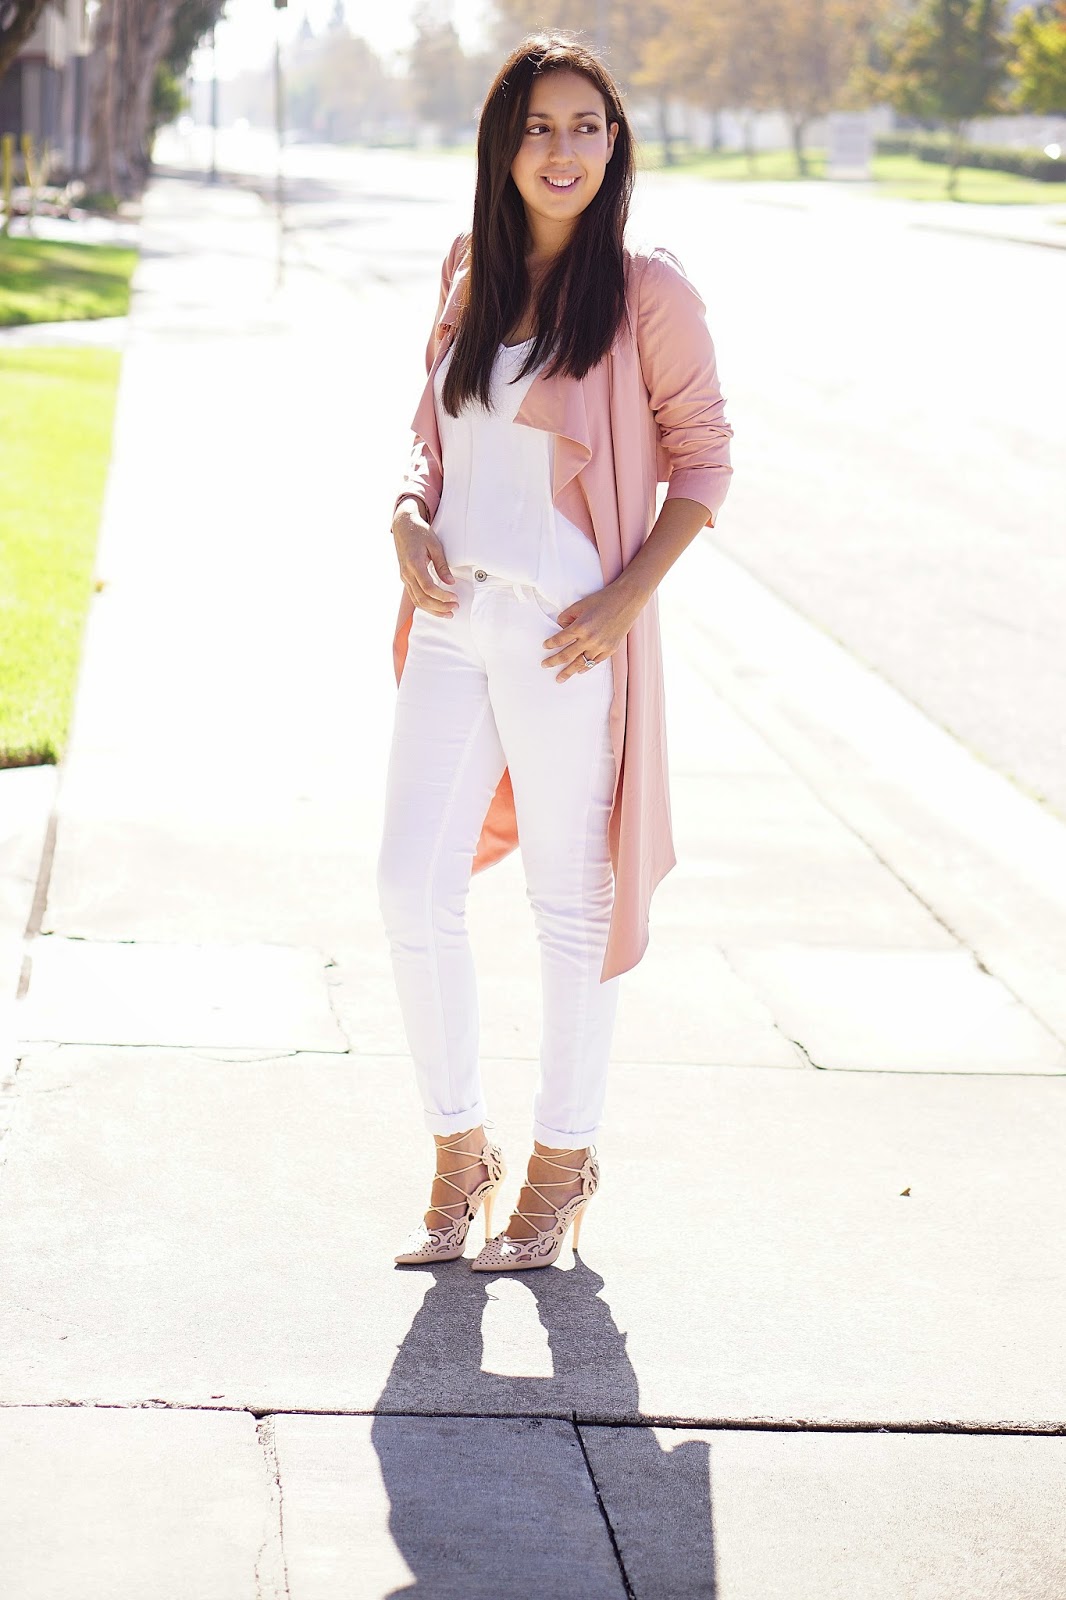 White Mango Cami, MNG by Mango, JCPenney, Arizona Skinny Jeans, White Jeans, Shoedazzle, Pink Trench Coat, Windsor Pink Trench Coat, Windsor, Neutral Outfit, Nude Laser Cut Heels, Christian Louboutin Inspired Heels, California Fall Fashion